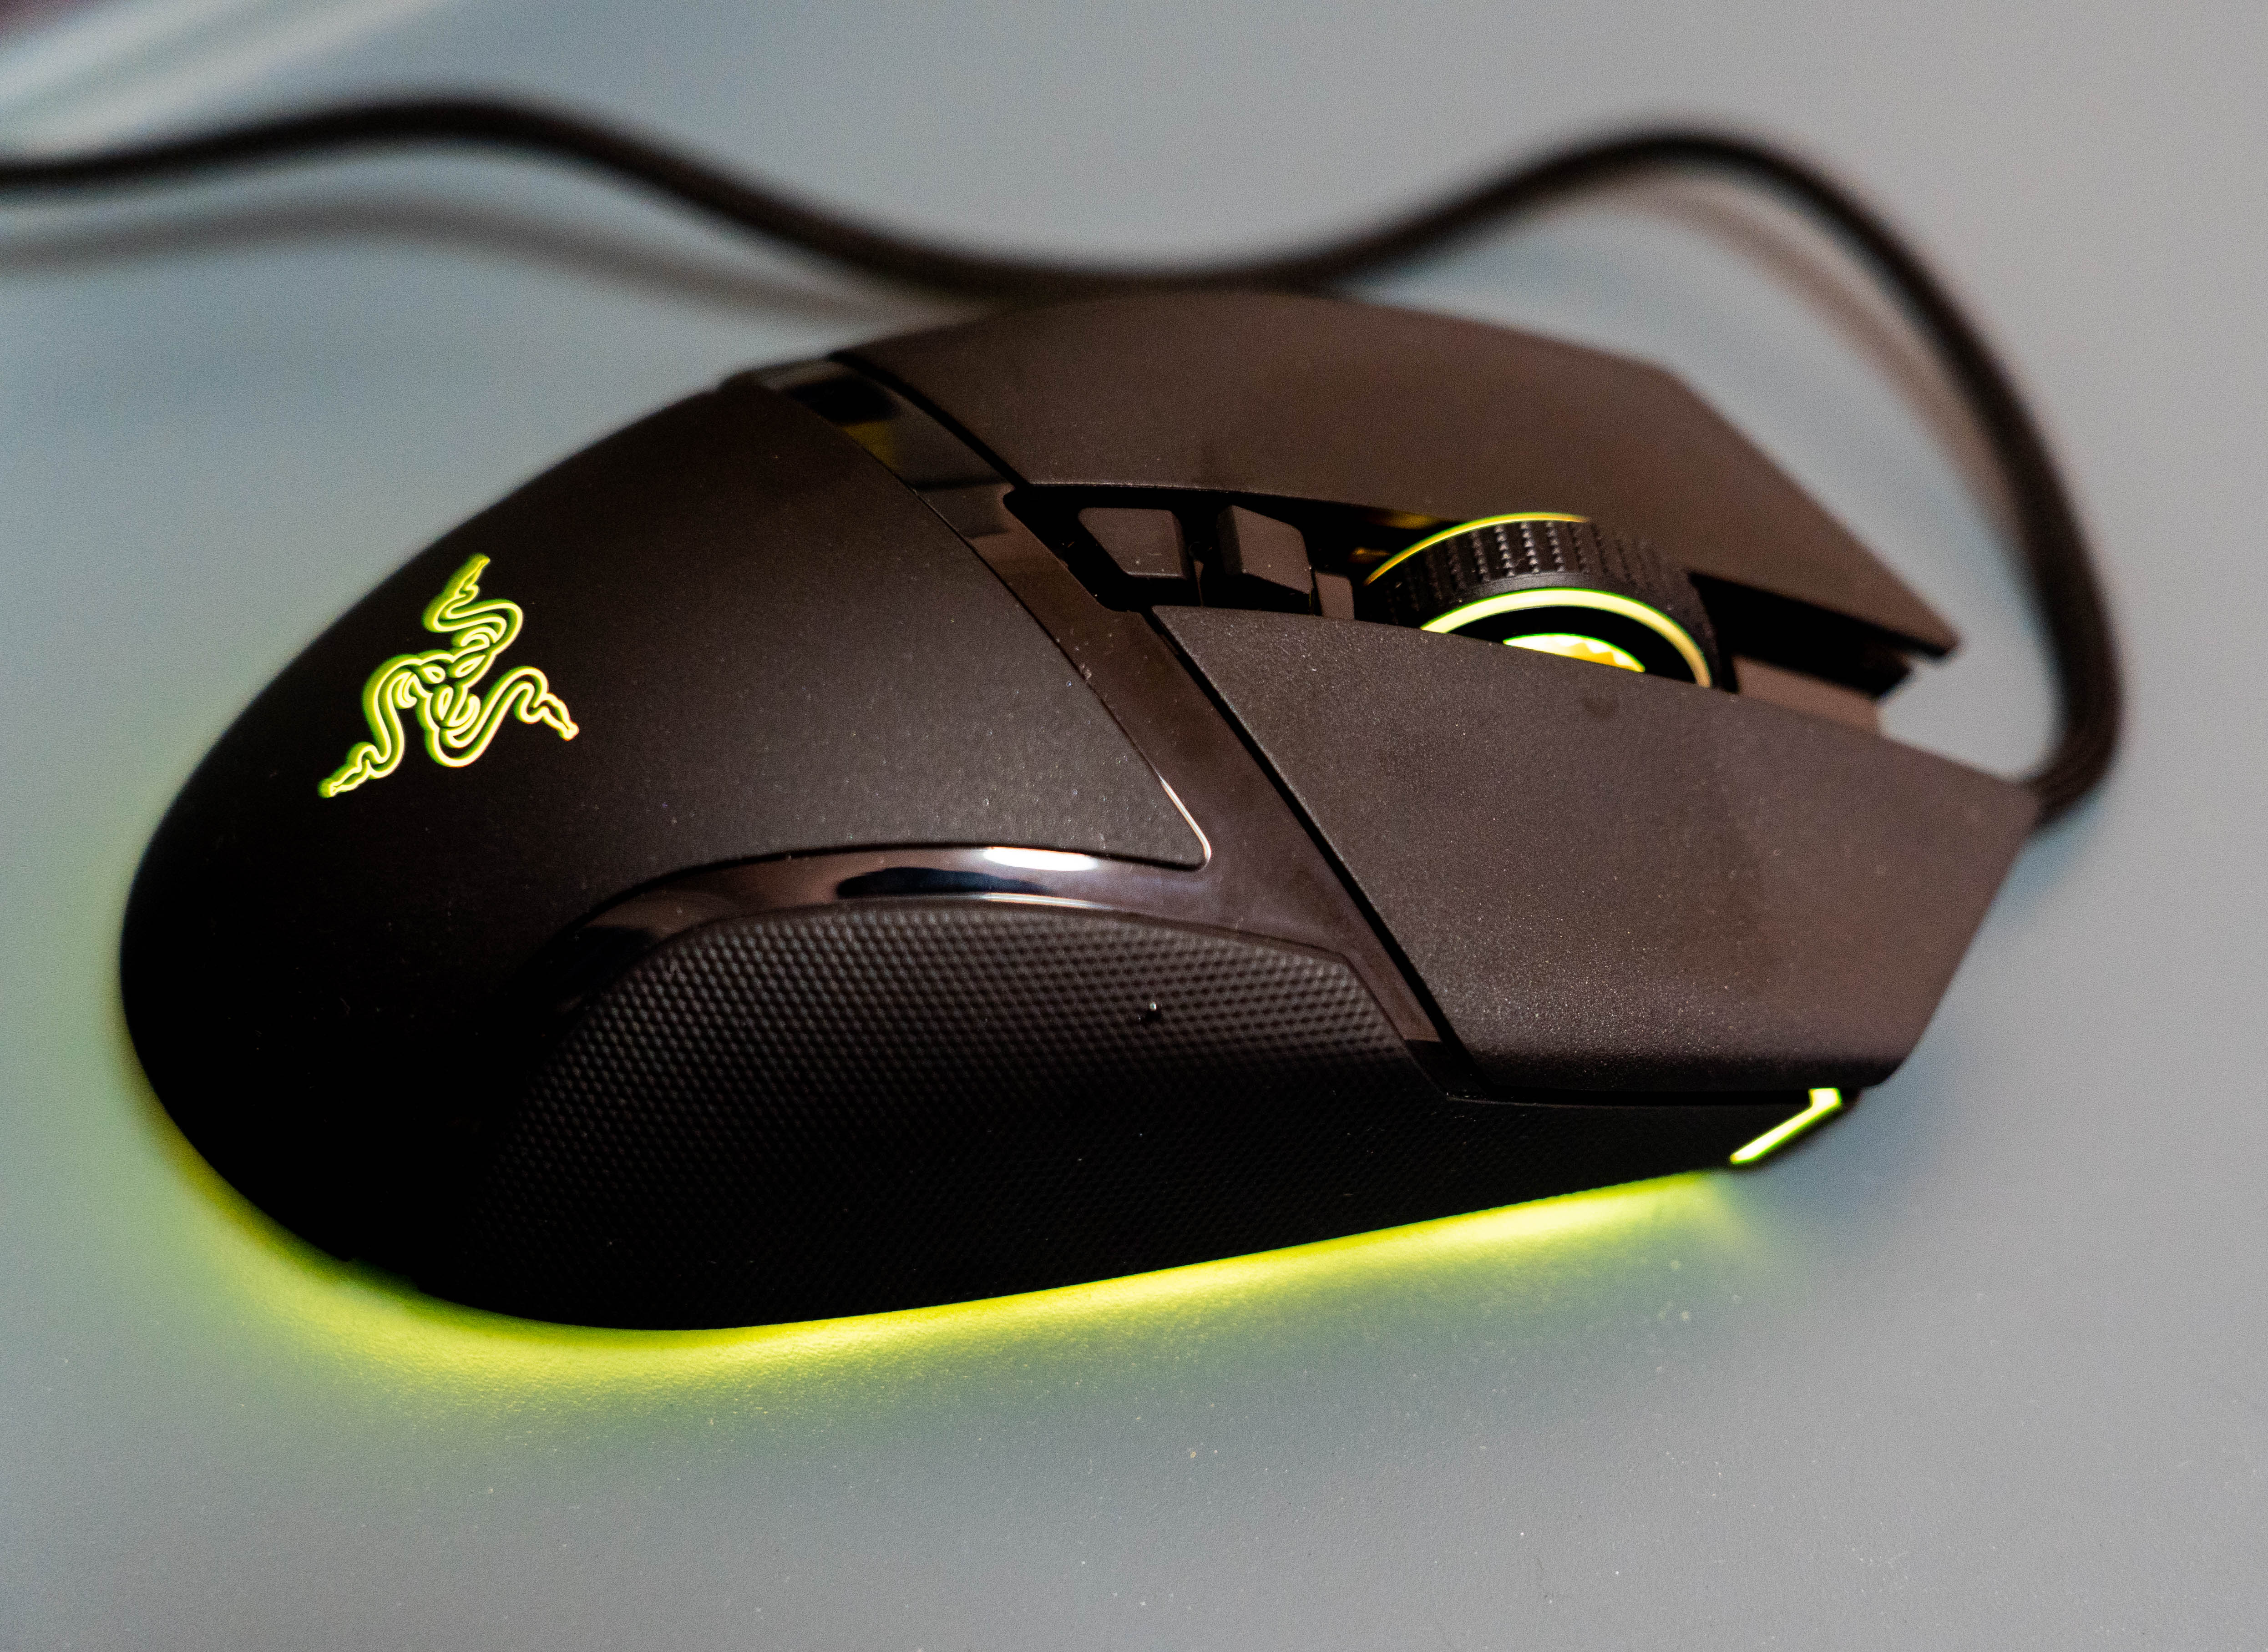 Razer Basilisk V3 review: The best FPS gaming mouse now has a smarter  scroll wheel